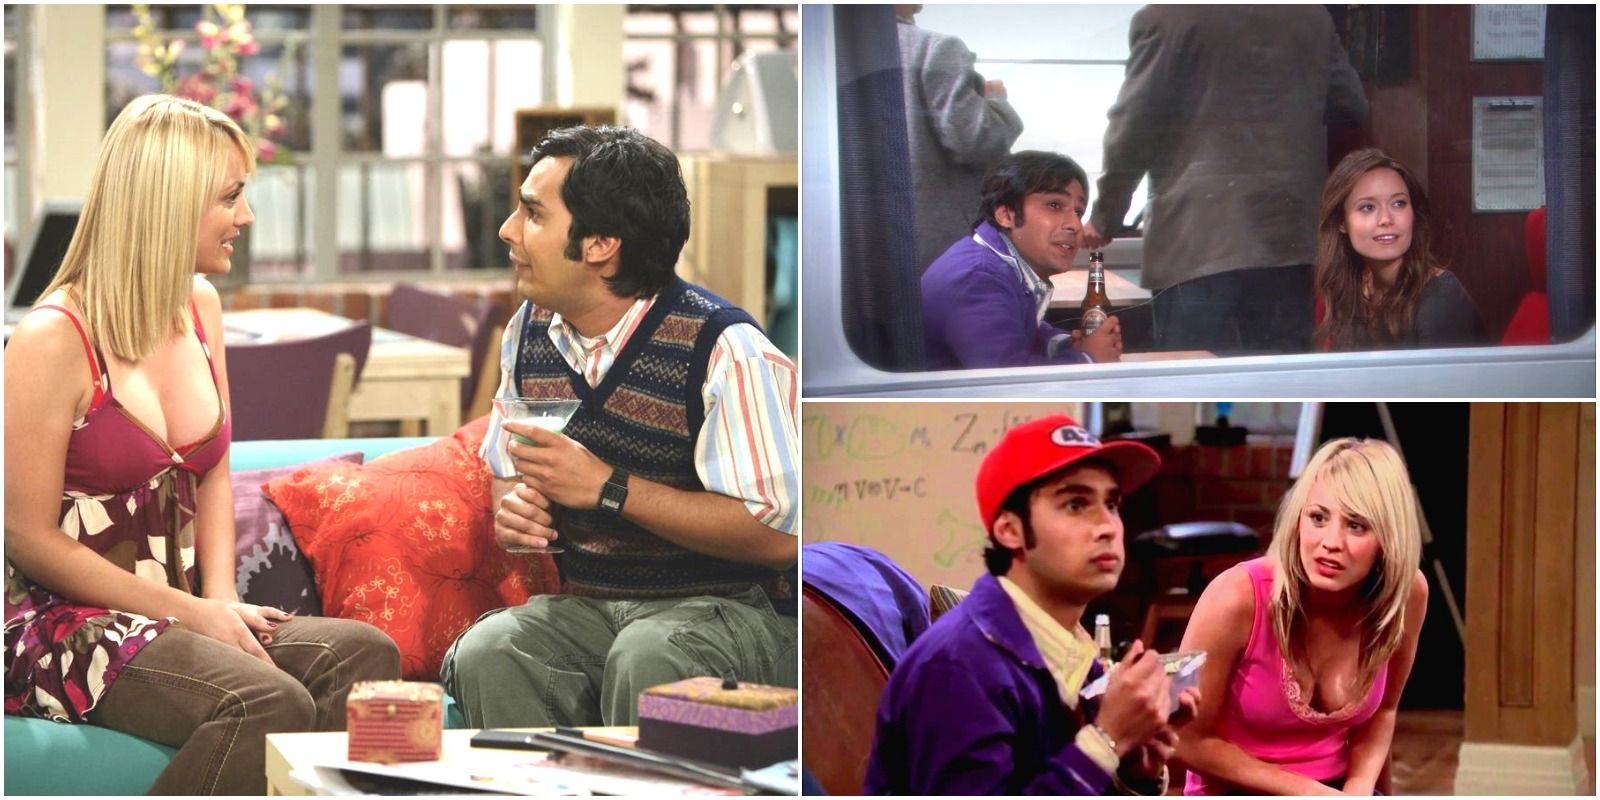 Raj not being able to talk to women unless drunk from The Big Bang Theory